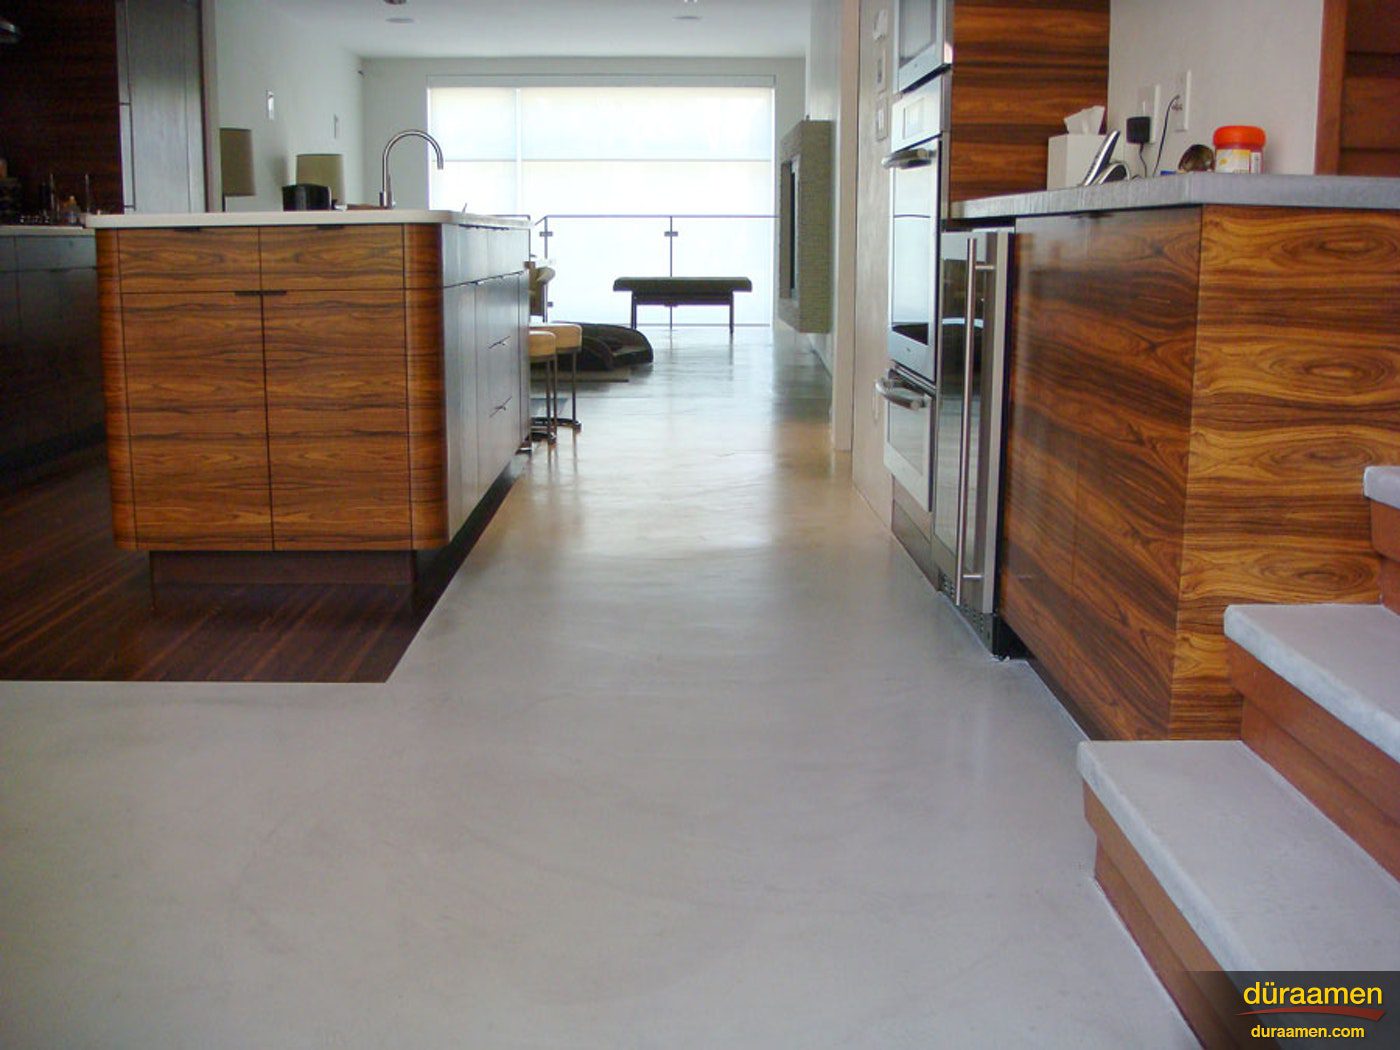 A look through the kitchen of this contemporary residence that has a modern concrete overlay installed as its flooring.